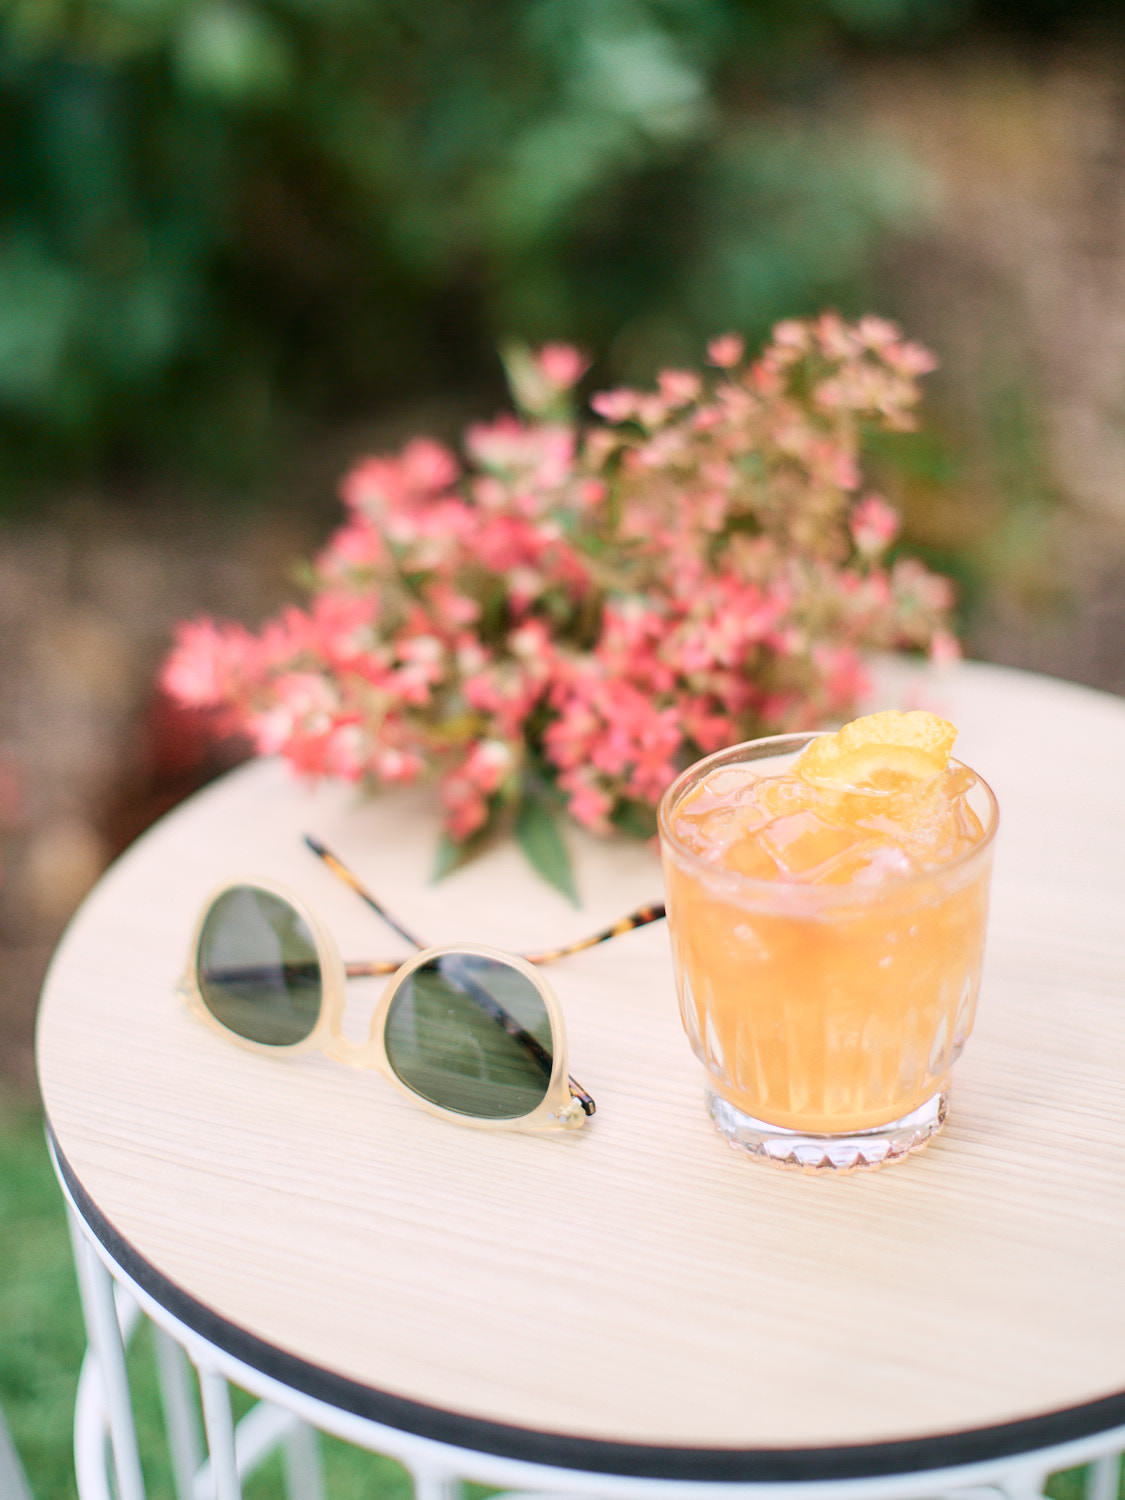 Cocktail and sunglasses on side table